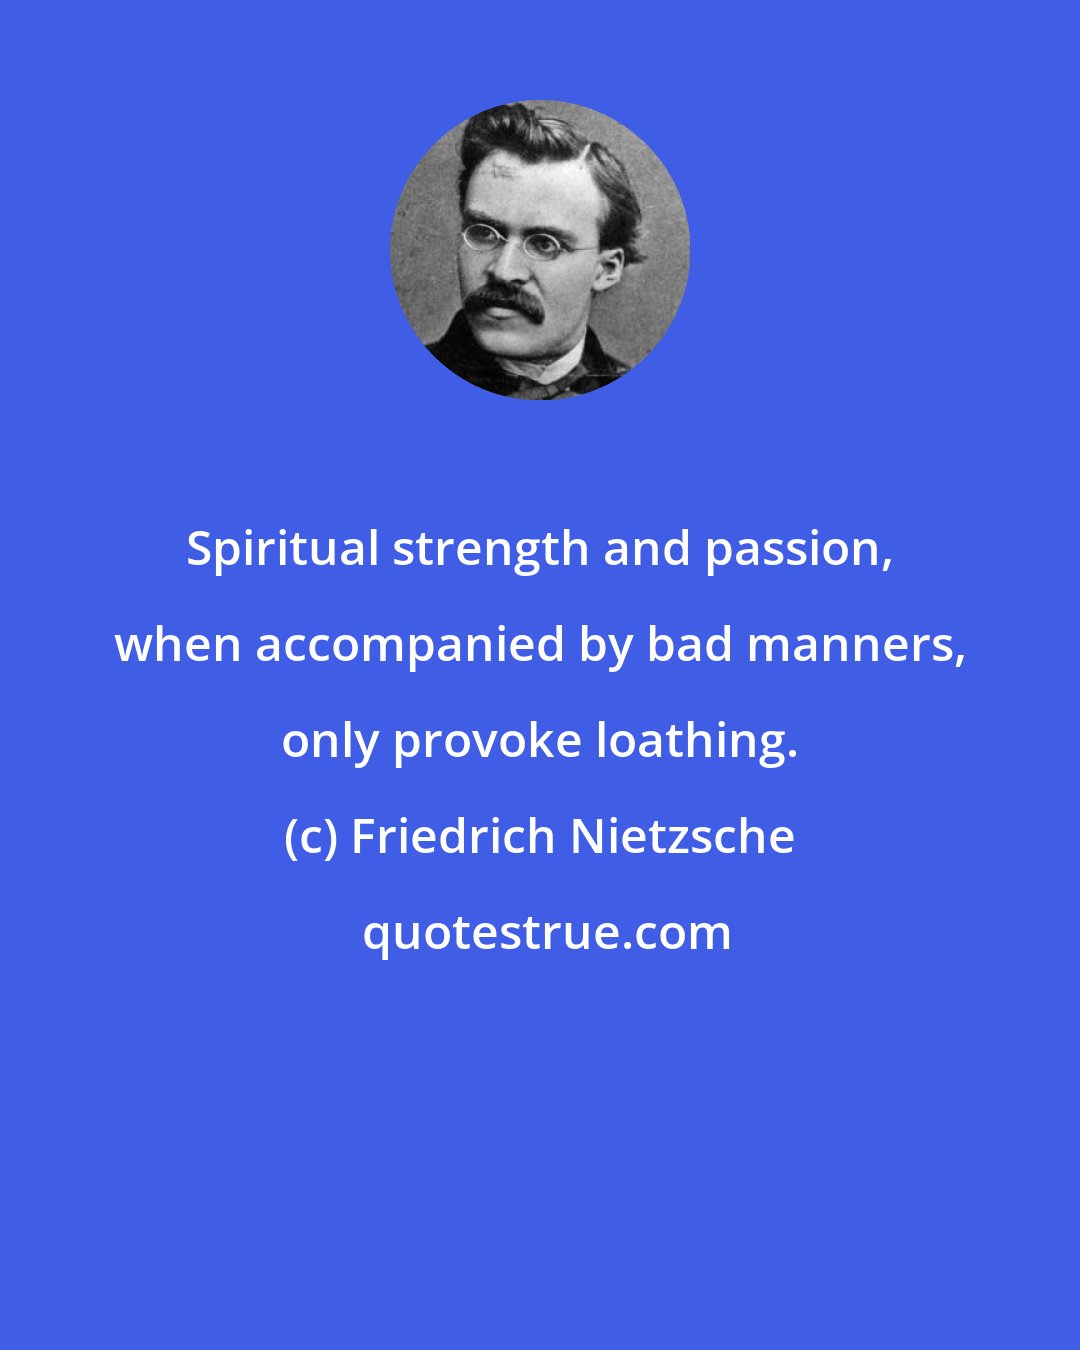 Friedrich Nietzsche: Spiritual strength and passion, when accompanied by bad manners, only provoke loathing.